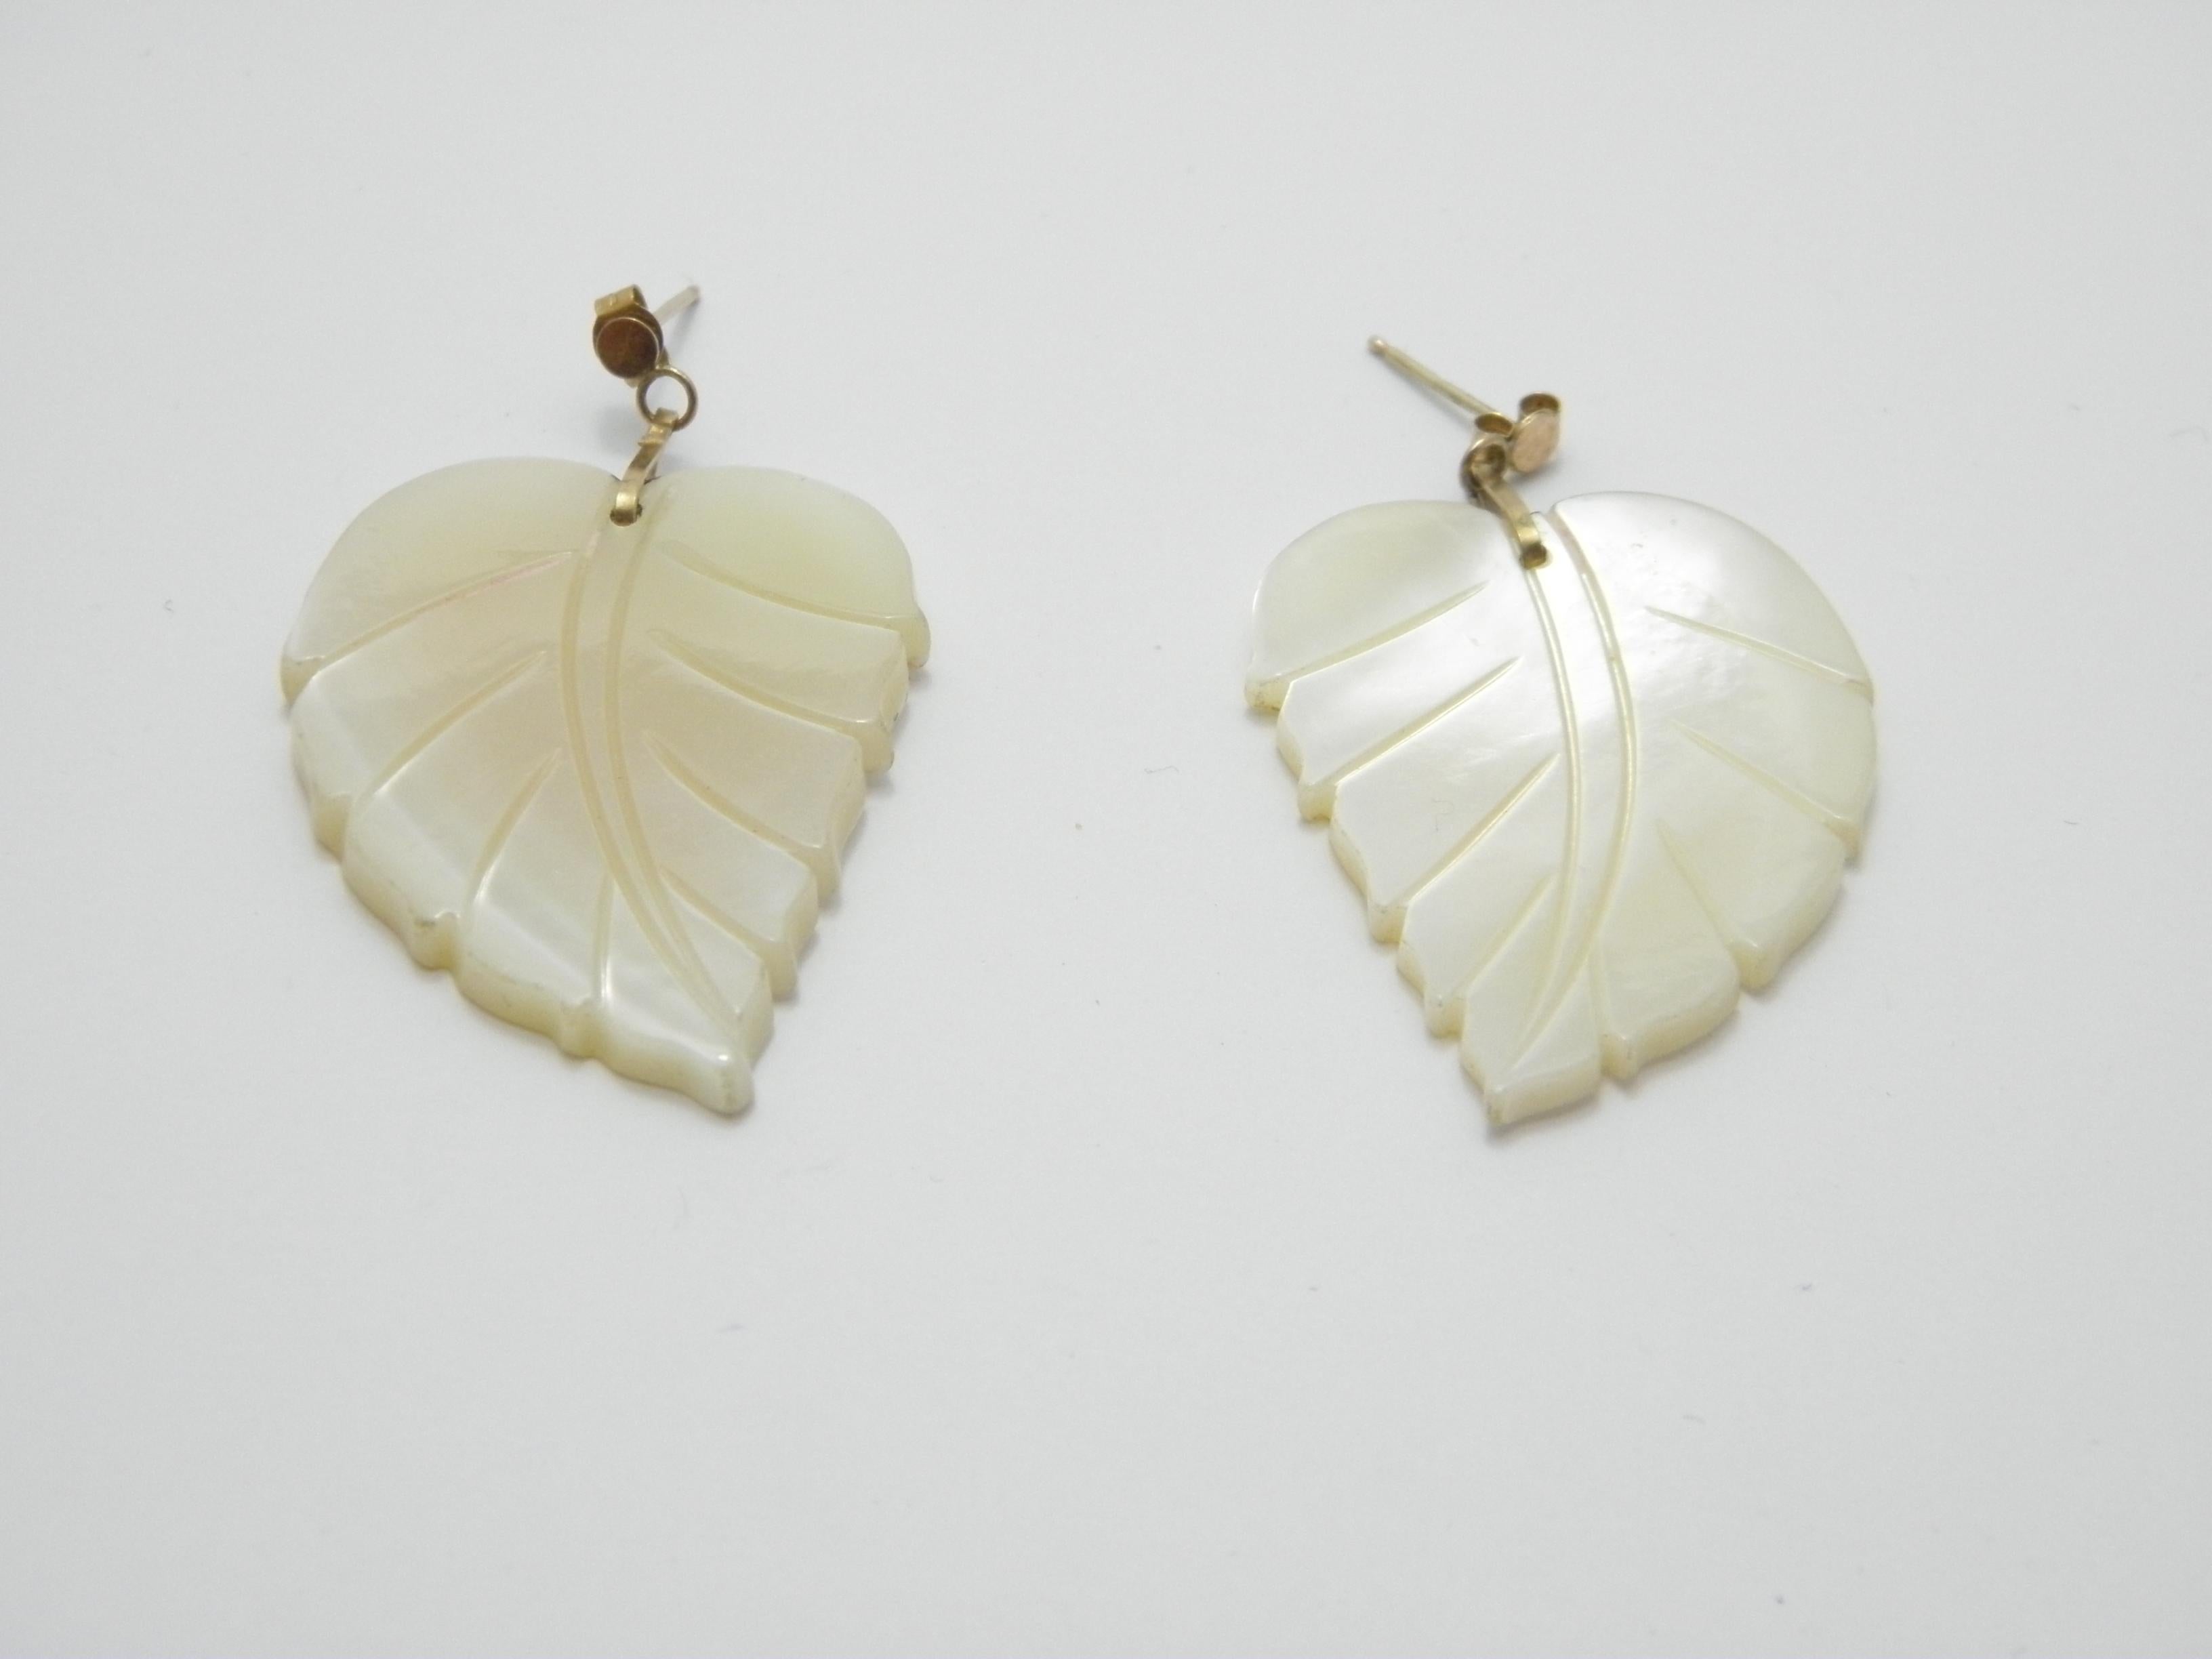 A very special item for you to consider:

9CT GOLD MOTHER OF PEARL LEAF DROP EARRINGS

DETAILS
Material: 375/1000 9ct Solid Yellow Gold
Style: Deco style large drop / dangle earrings - very stylish
Gemstone: Hand carved mother of pearl panels, leaf